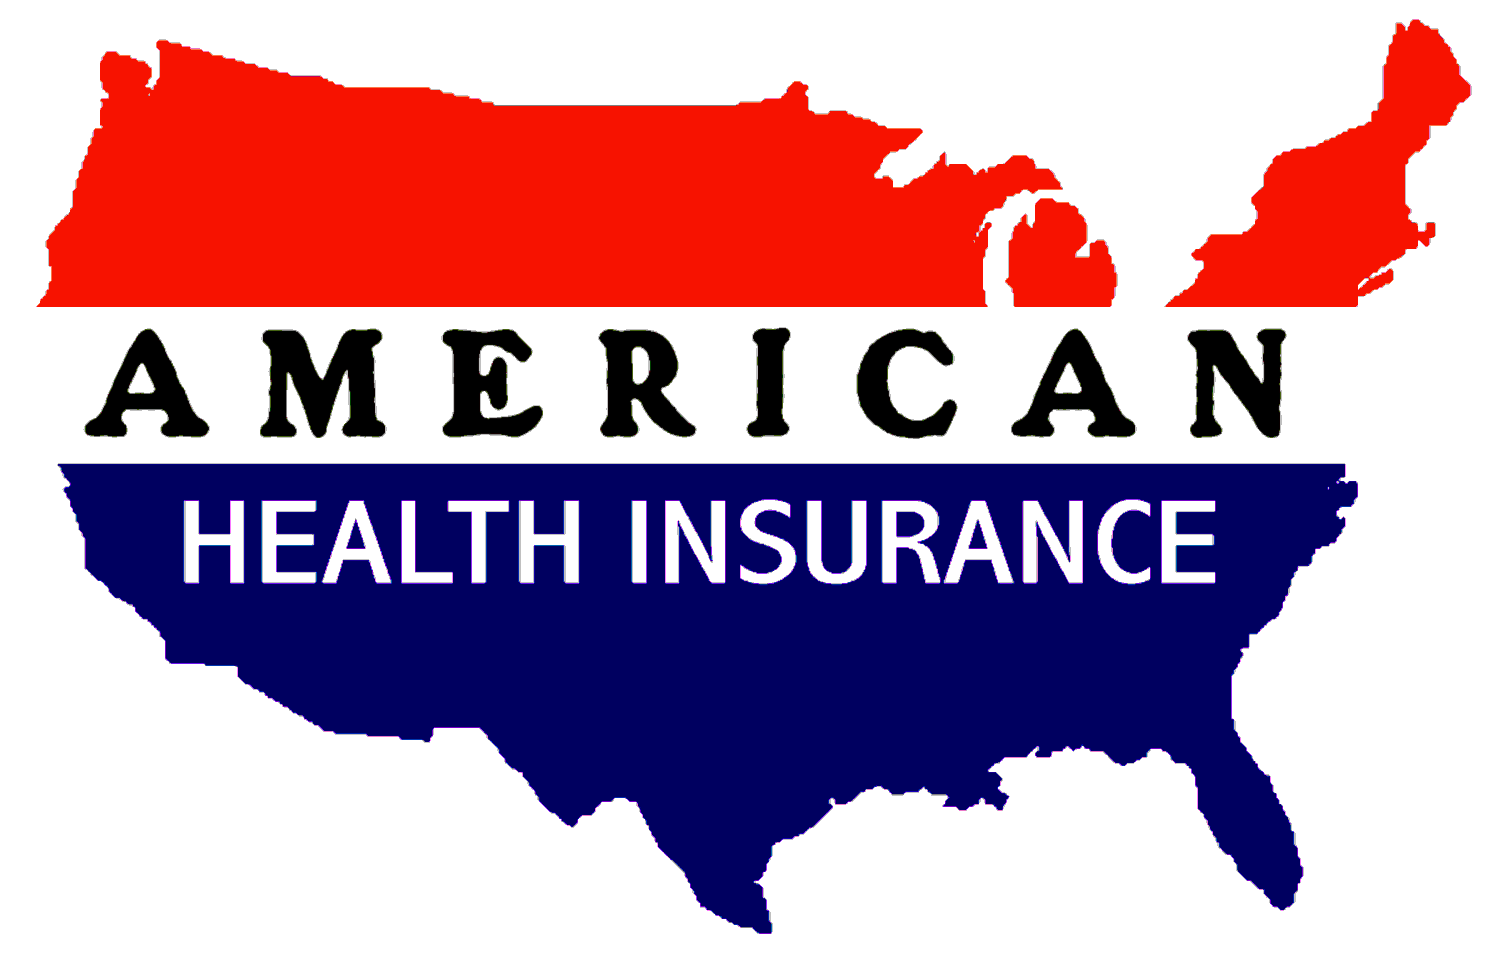 Blue Cross - American Health Insurance; Special Health Plans for 18-29